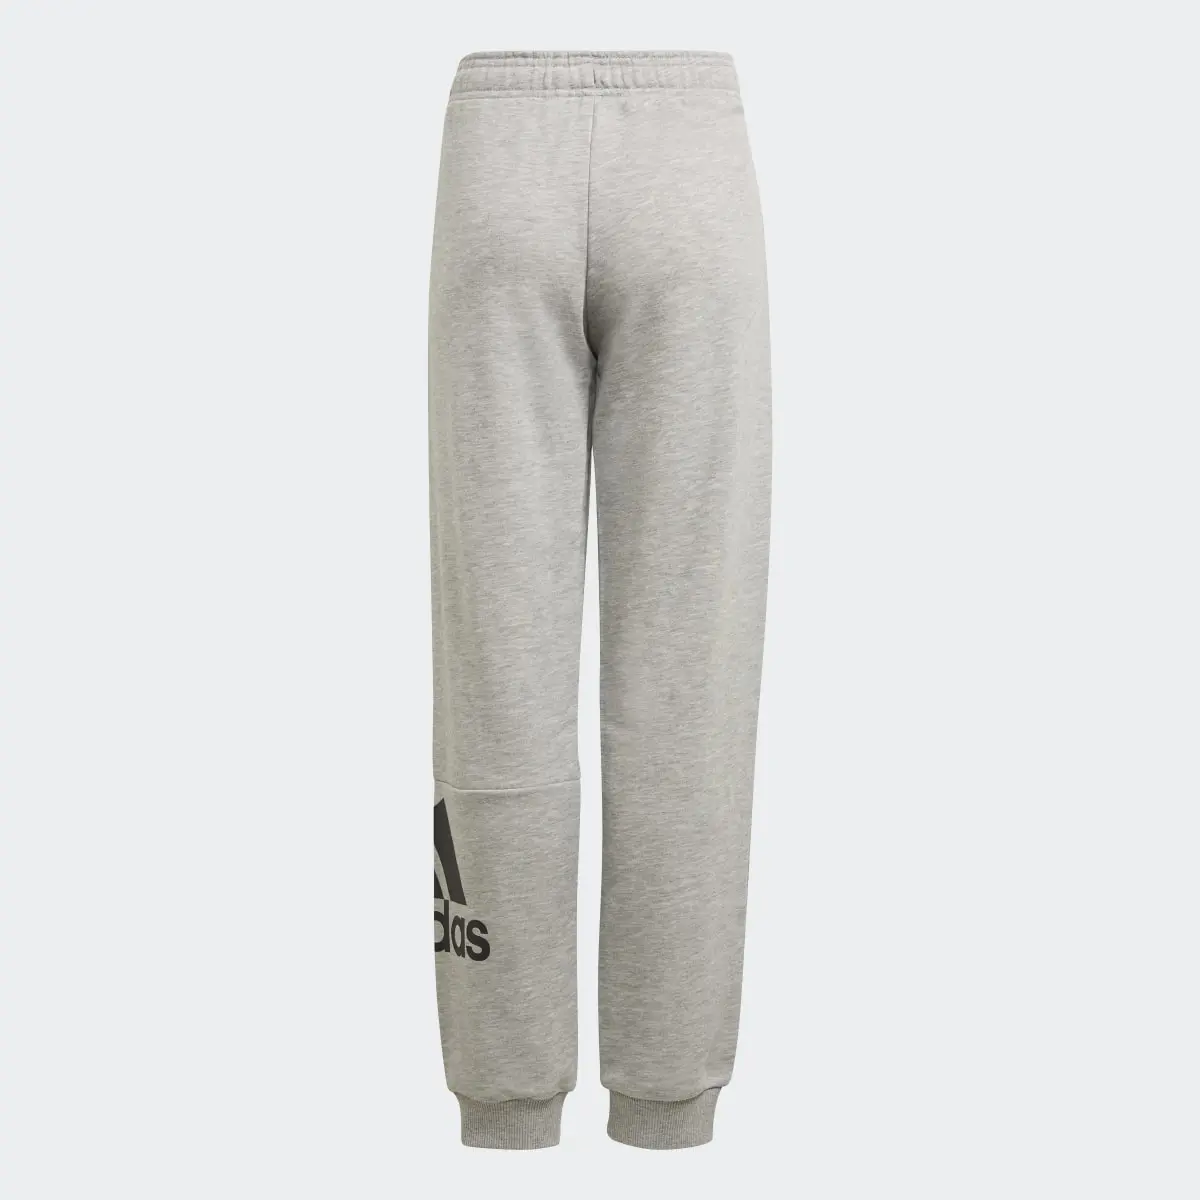 Adidas Essentials French Terry Joggers. 2